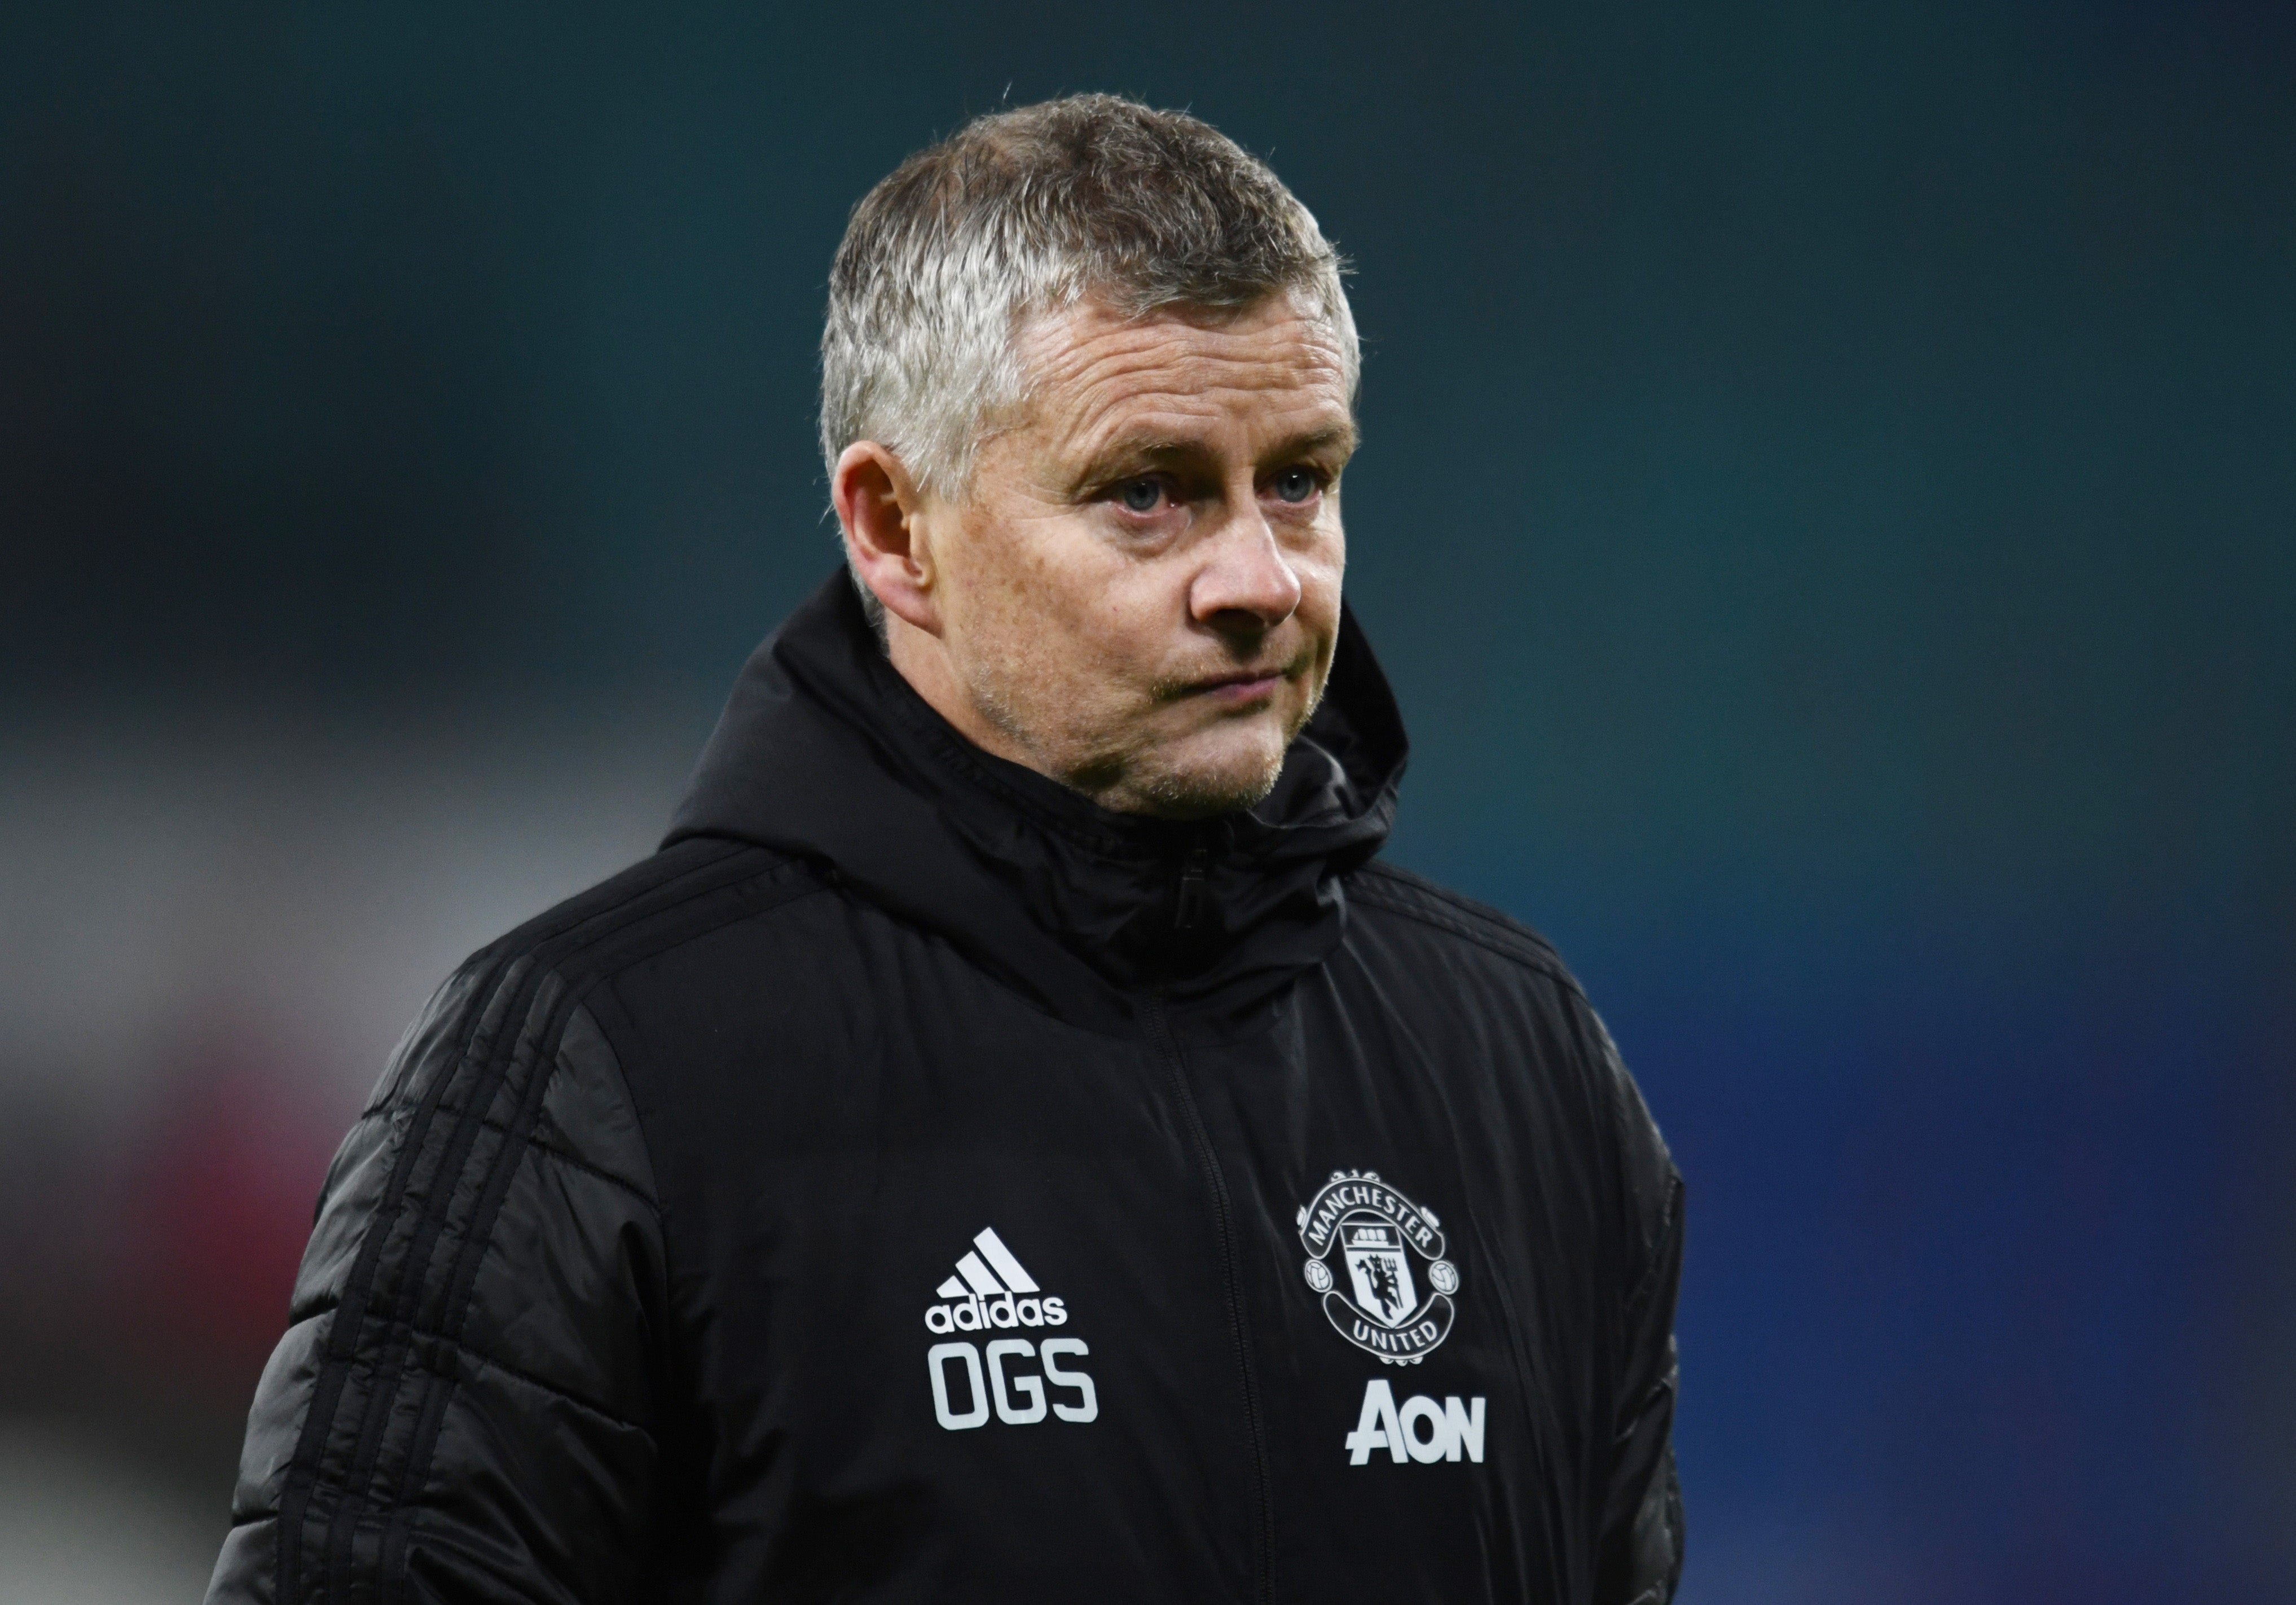 Ole Gunnar Solskjaer saw his Manchester United side eliminated from the Champions League